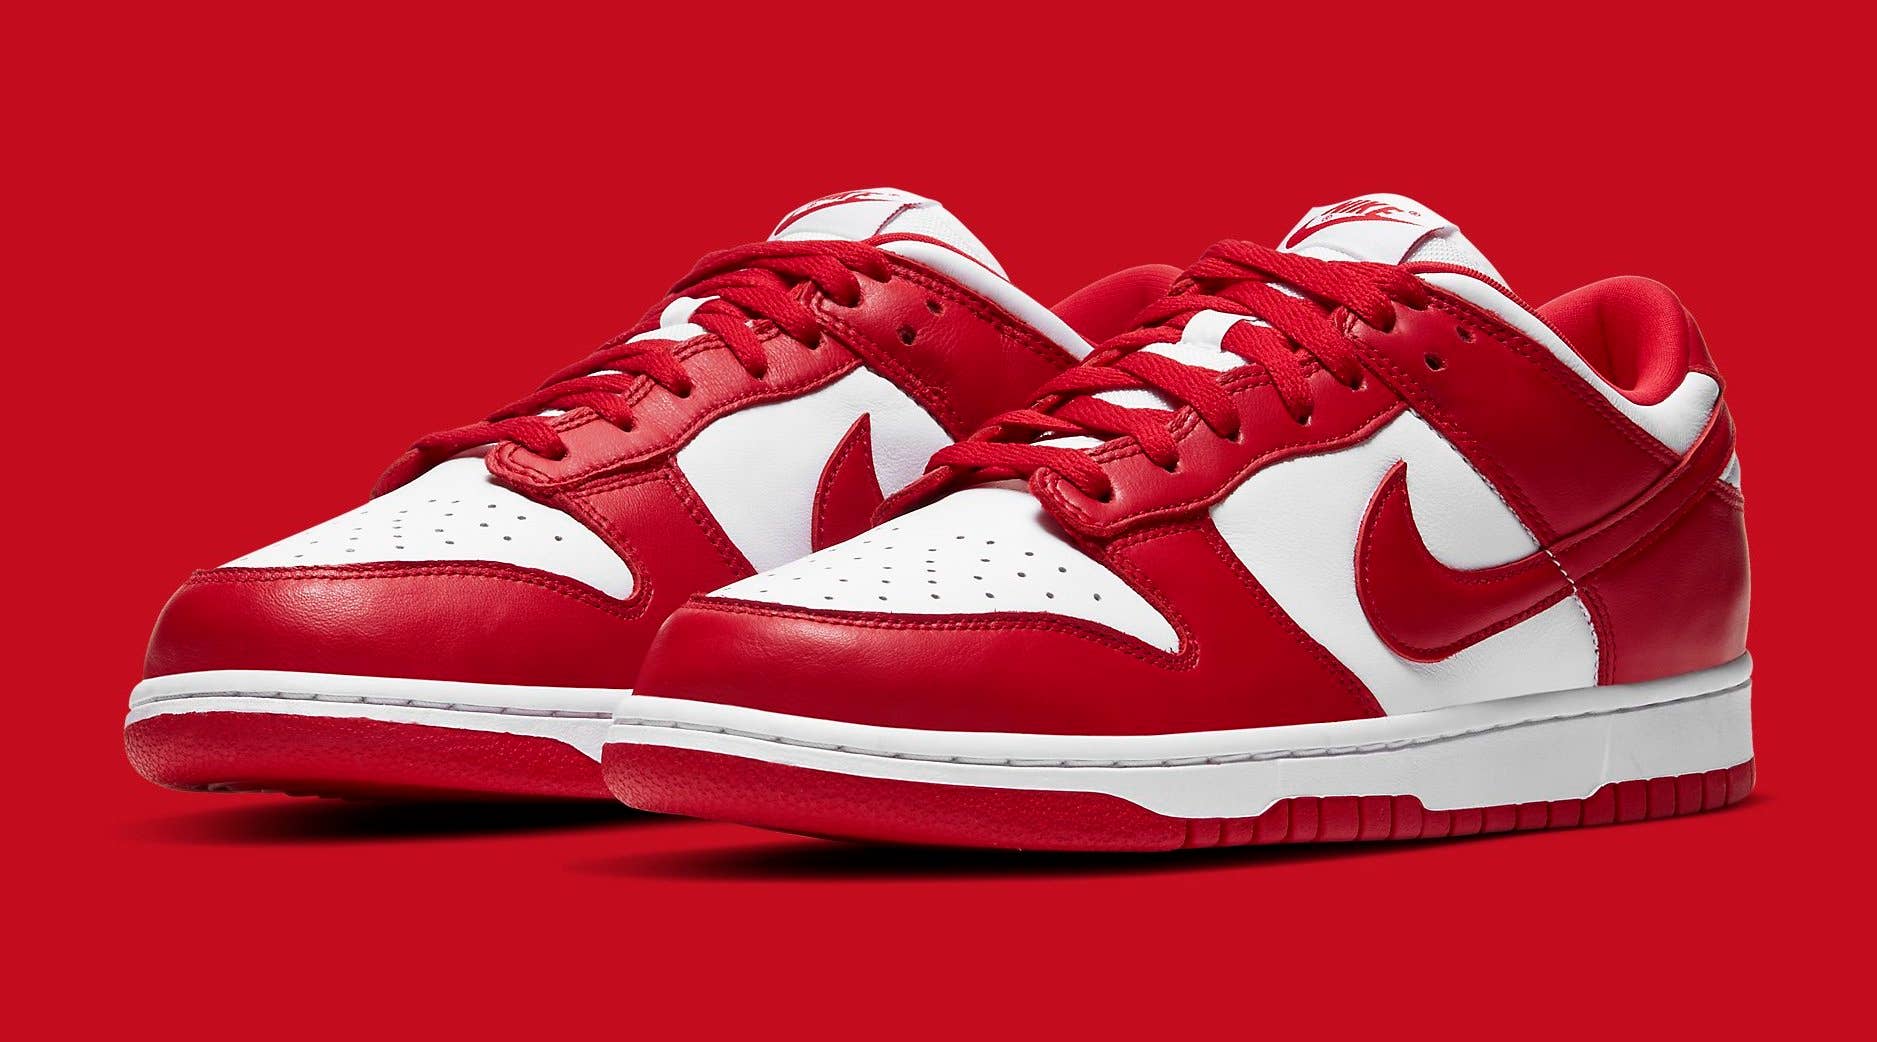 Nike Dunk Low University Red Release Date CU1727 100 Pair